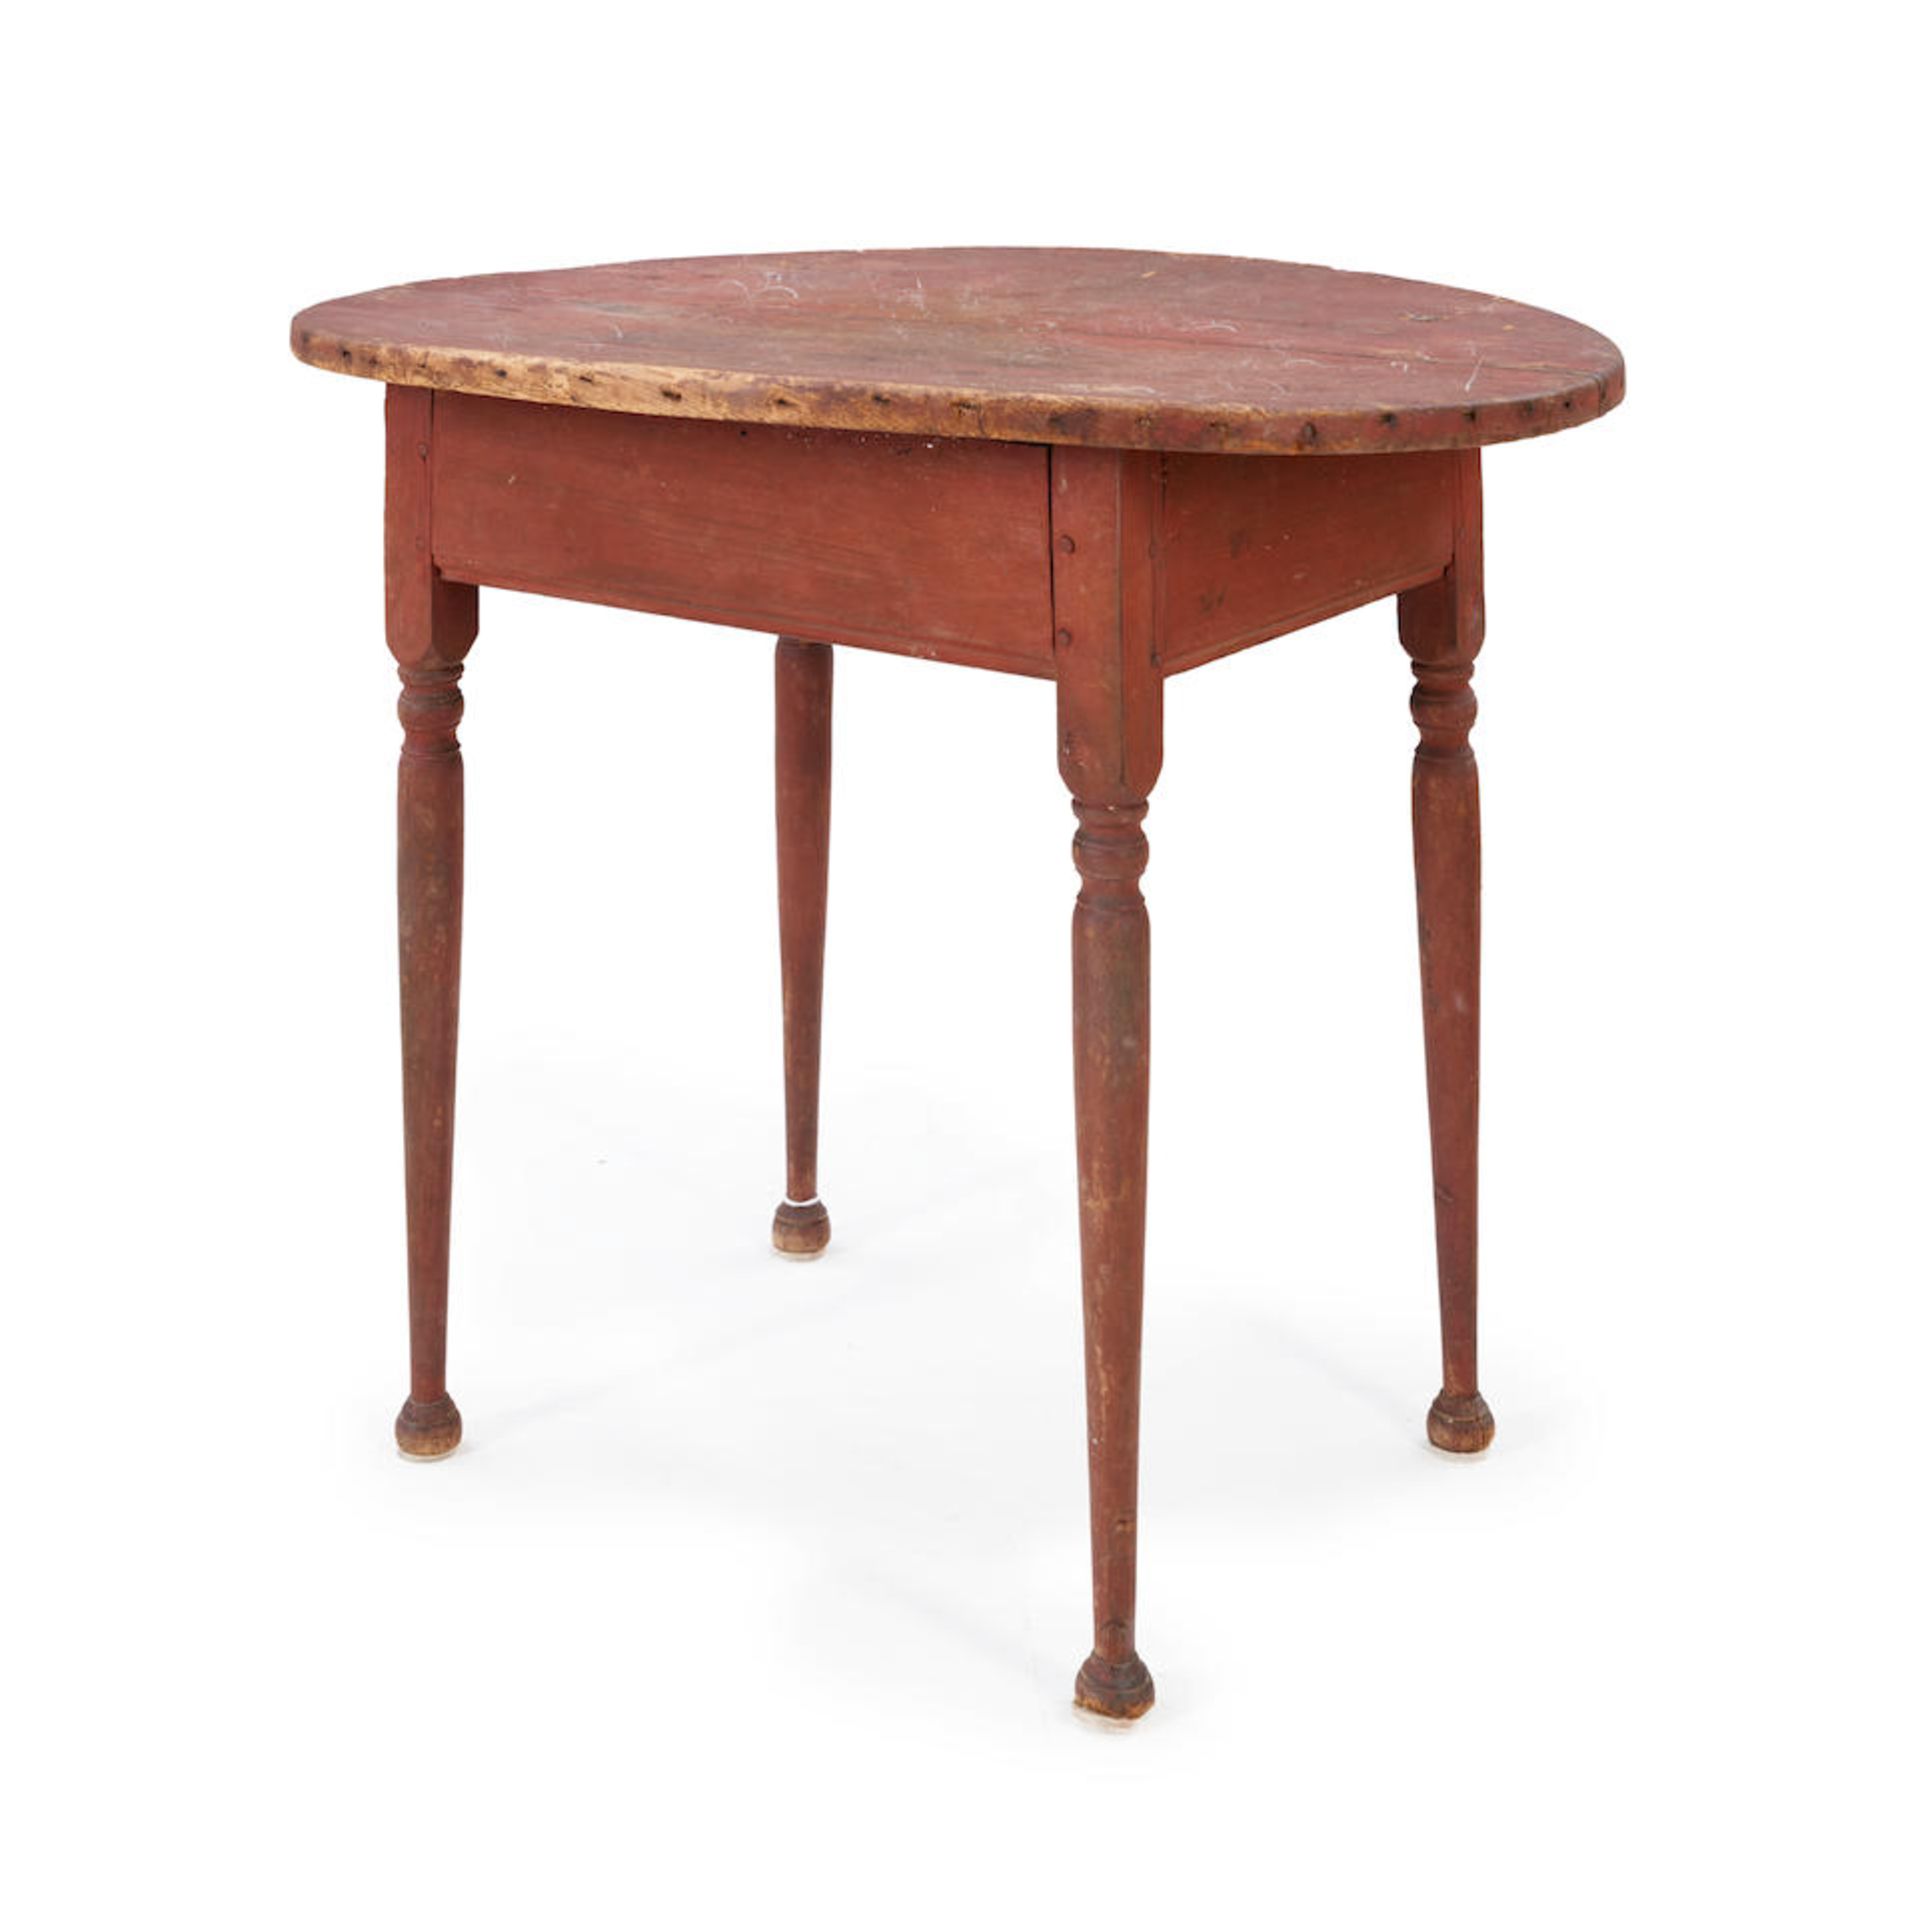 COUNTRY RED-PAINTED TEA TABLE